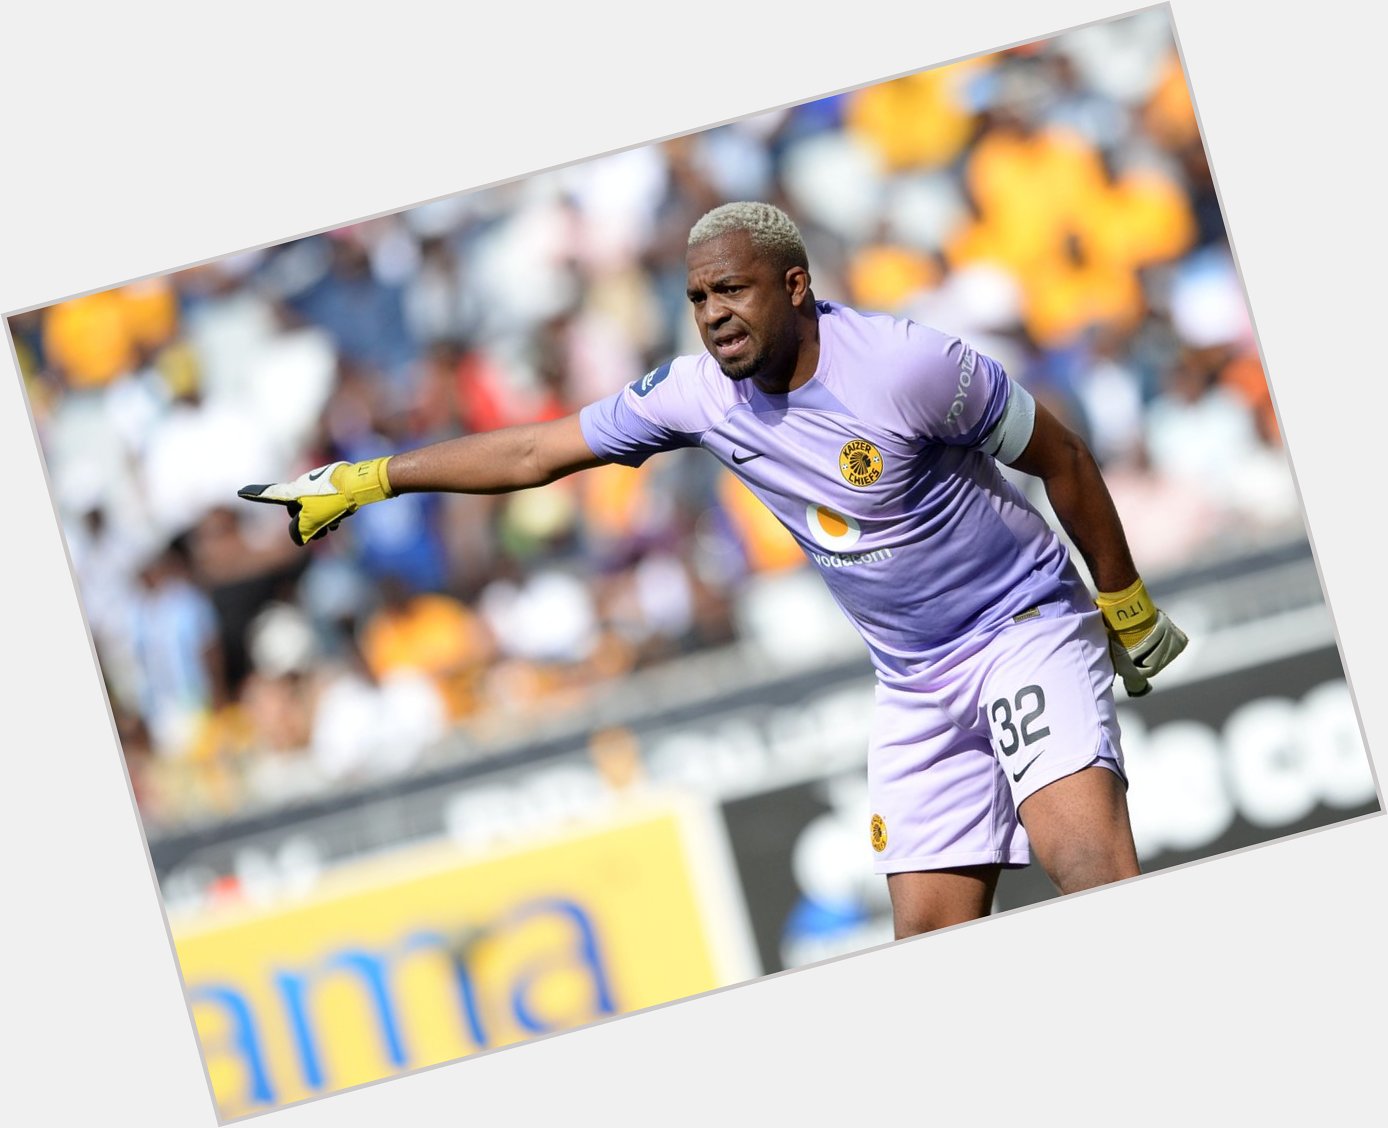 Happy Birthday to legend and Captain Itumeleng Khune! 

We hope you have an amazing day 